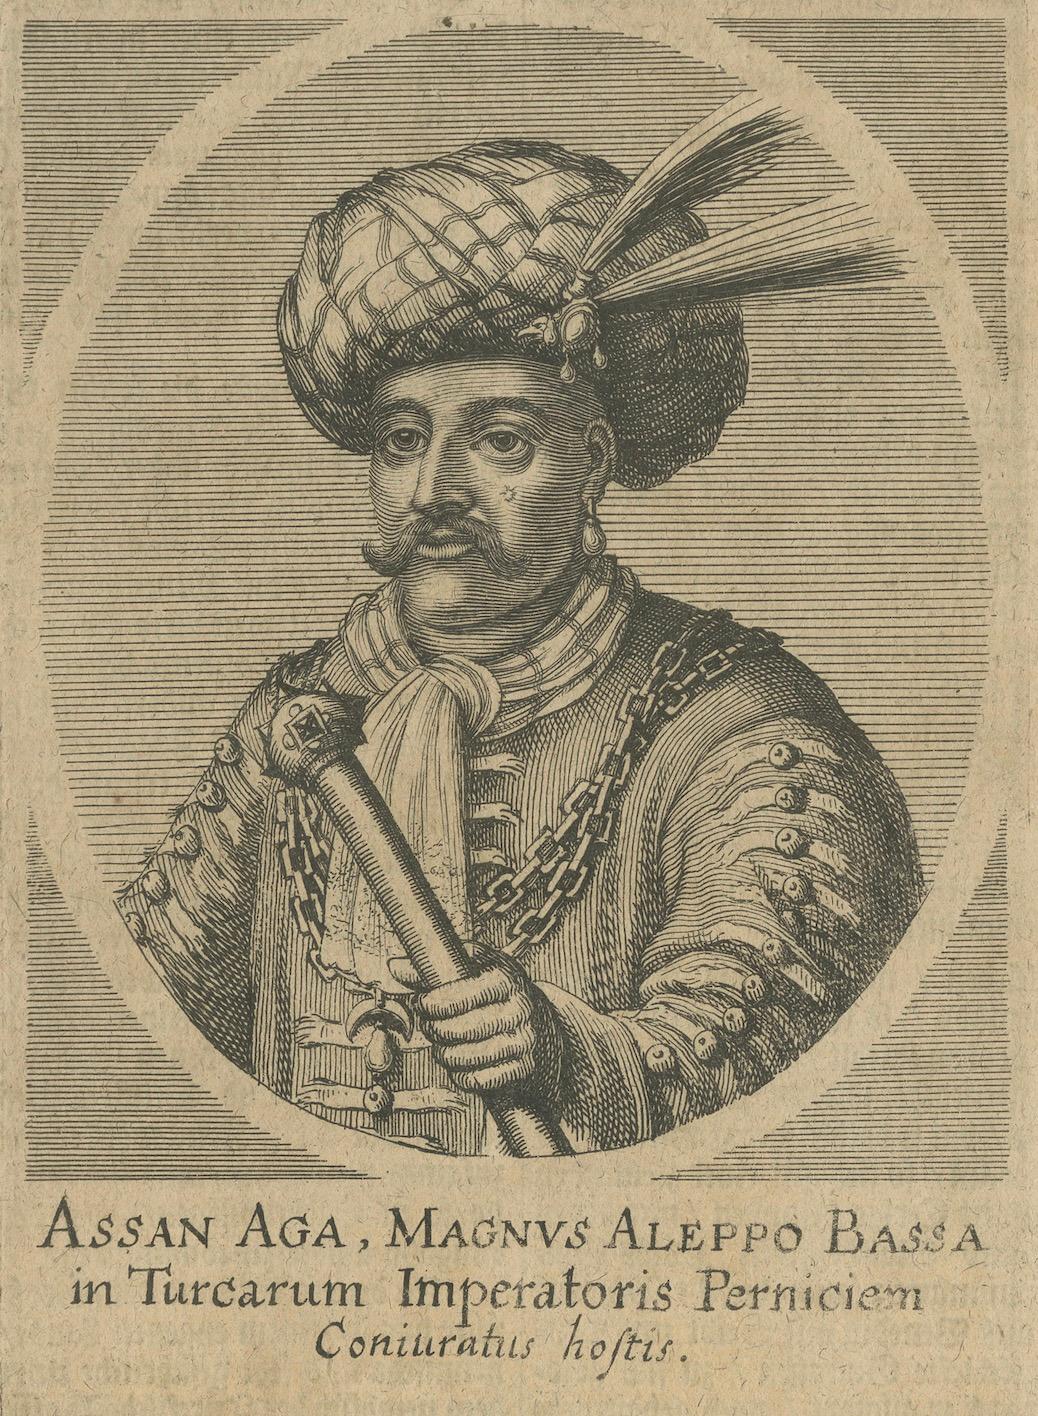 17th Century 1687 Portrait of Assan Aga by E. Nessenthaler: A Glimpse into Ottoman Nobility For Sale